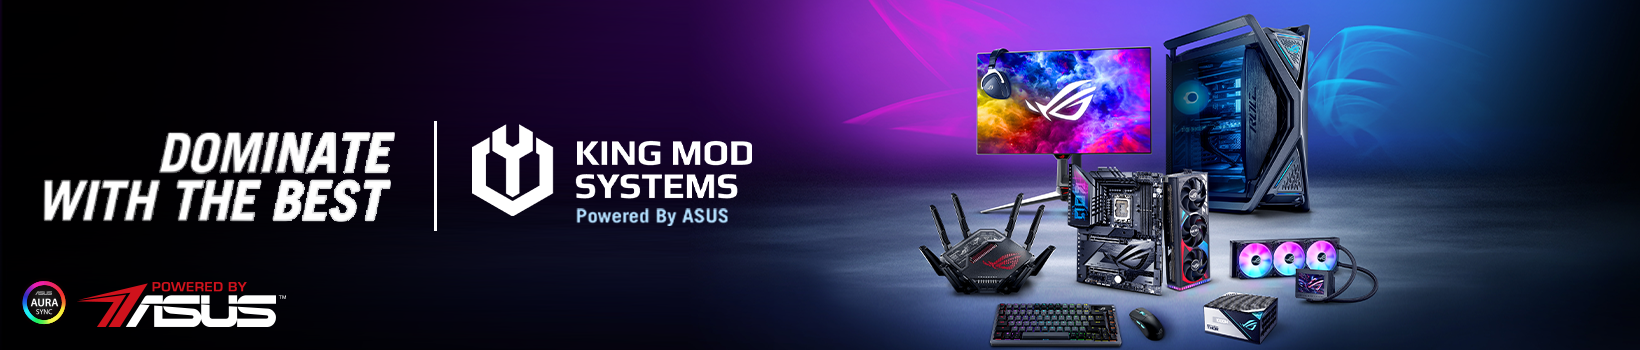 King Mod Systems Powered by ASUS